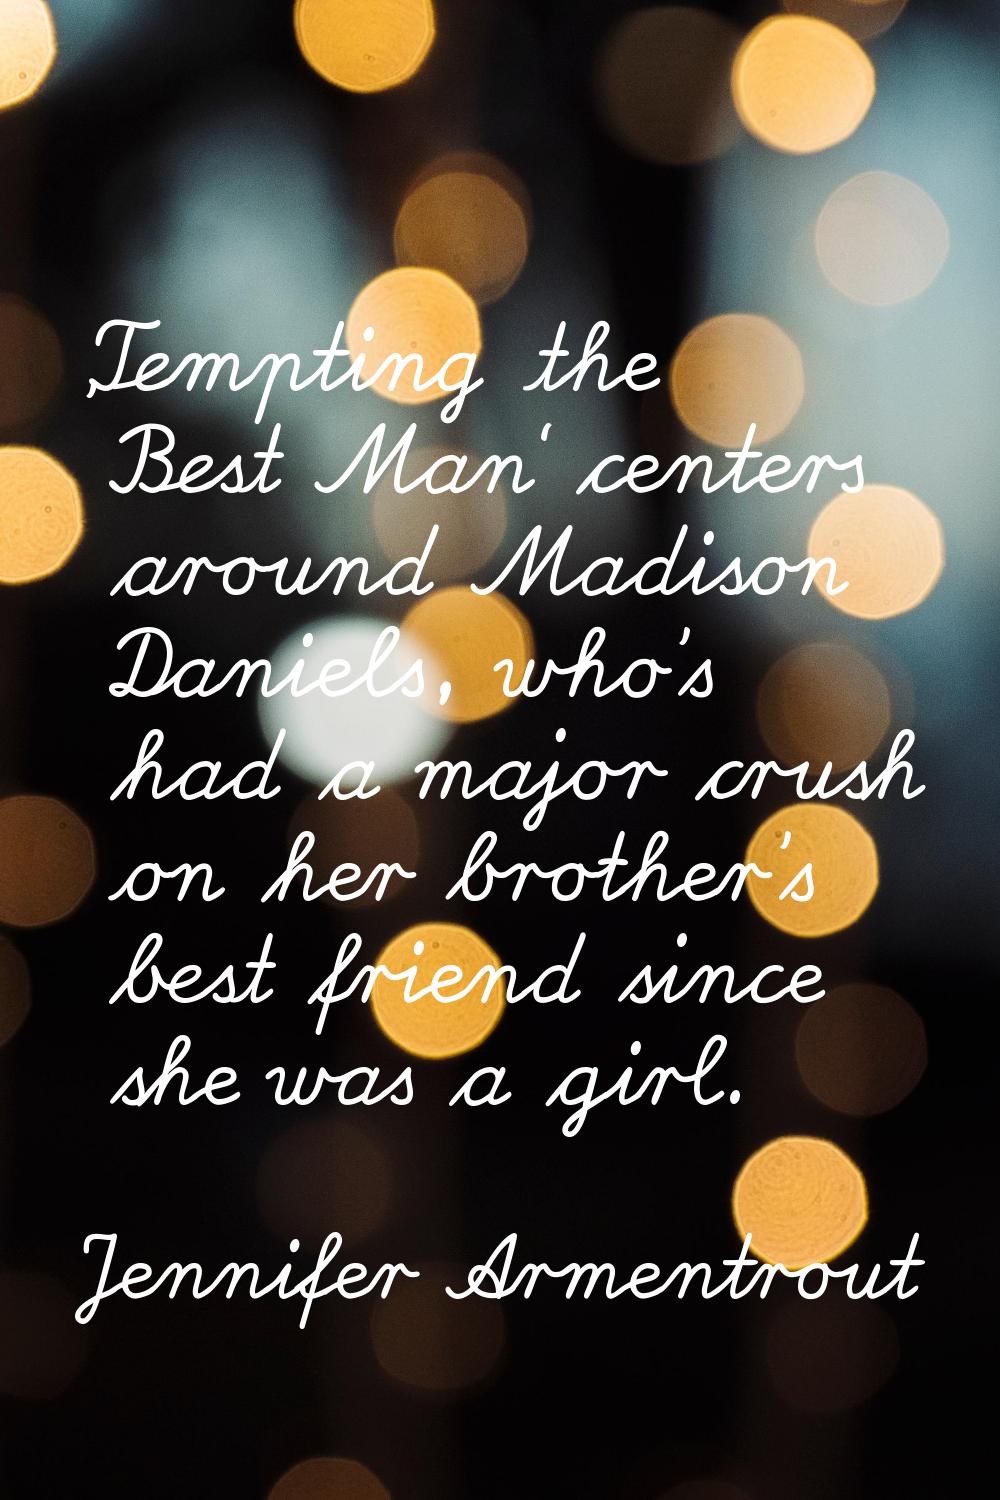 'Tempting the Best Man' centers around Madison Daniels, who's had a major crush on her brother's be